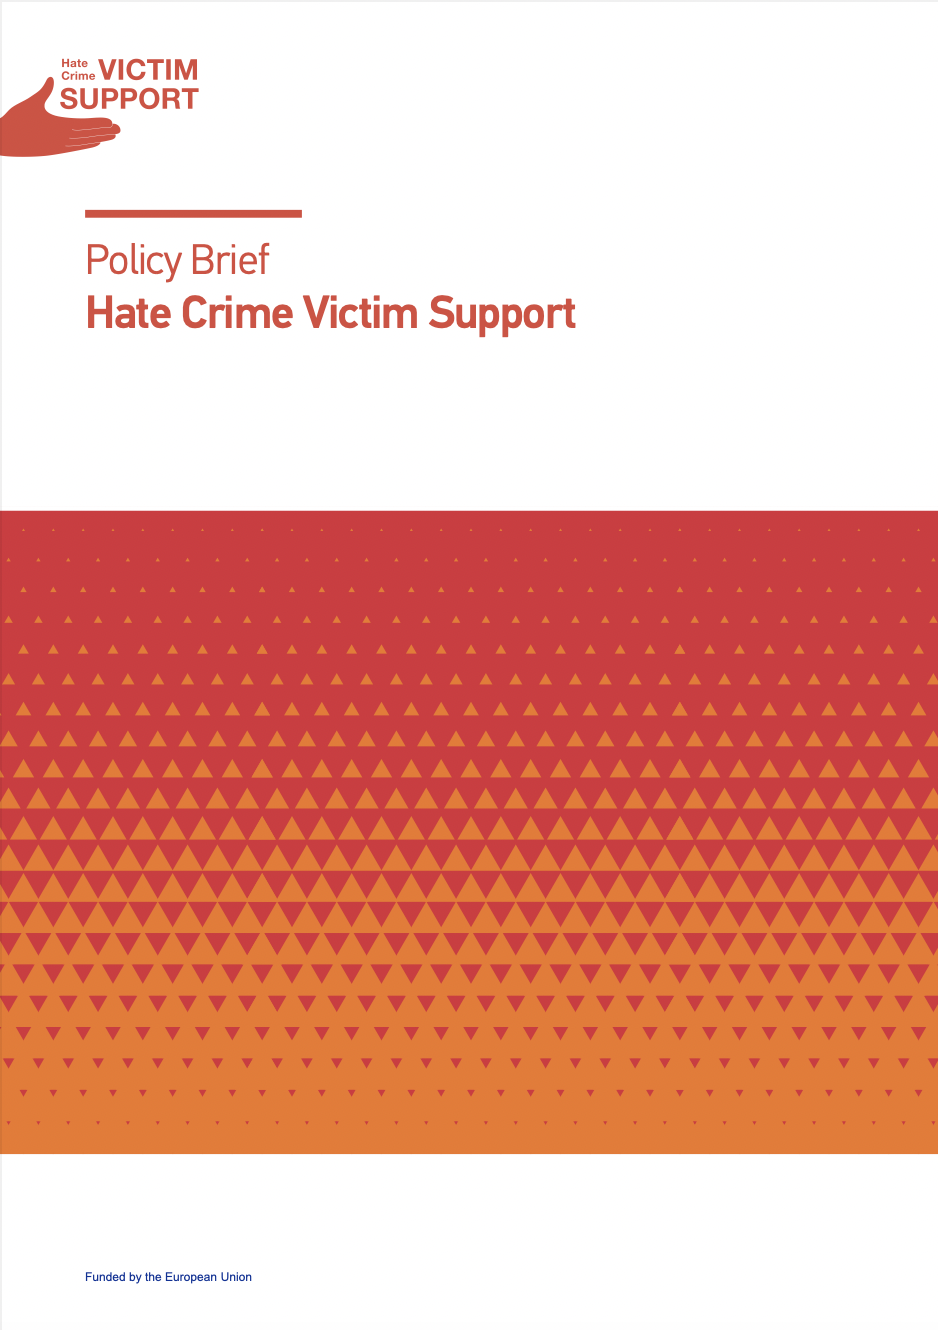 Hate Crime Victim Support: Policy Brief